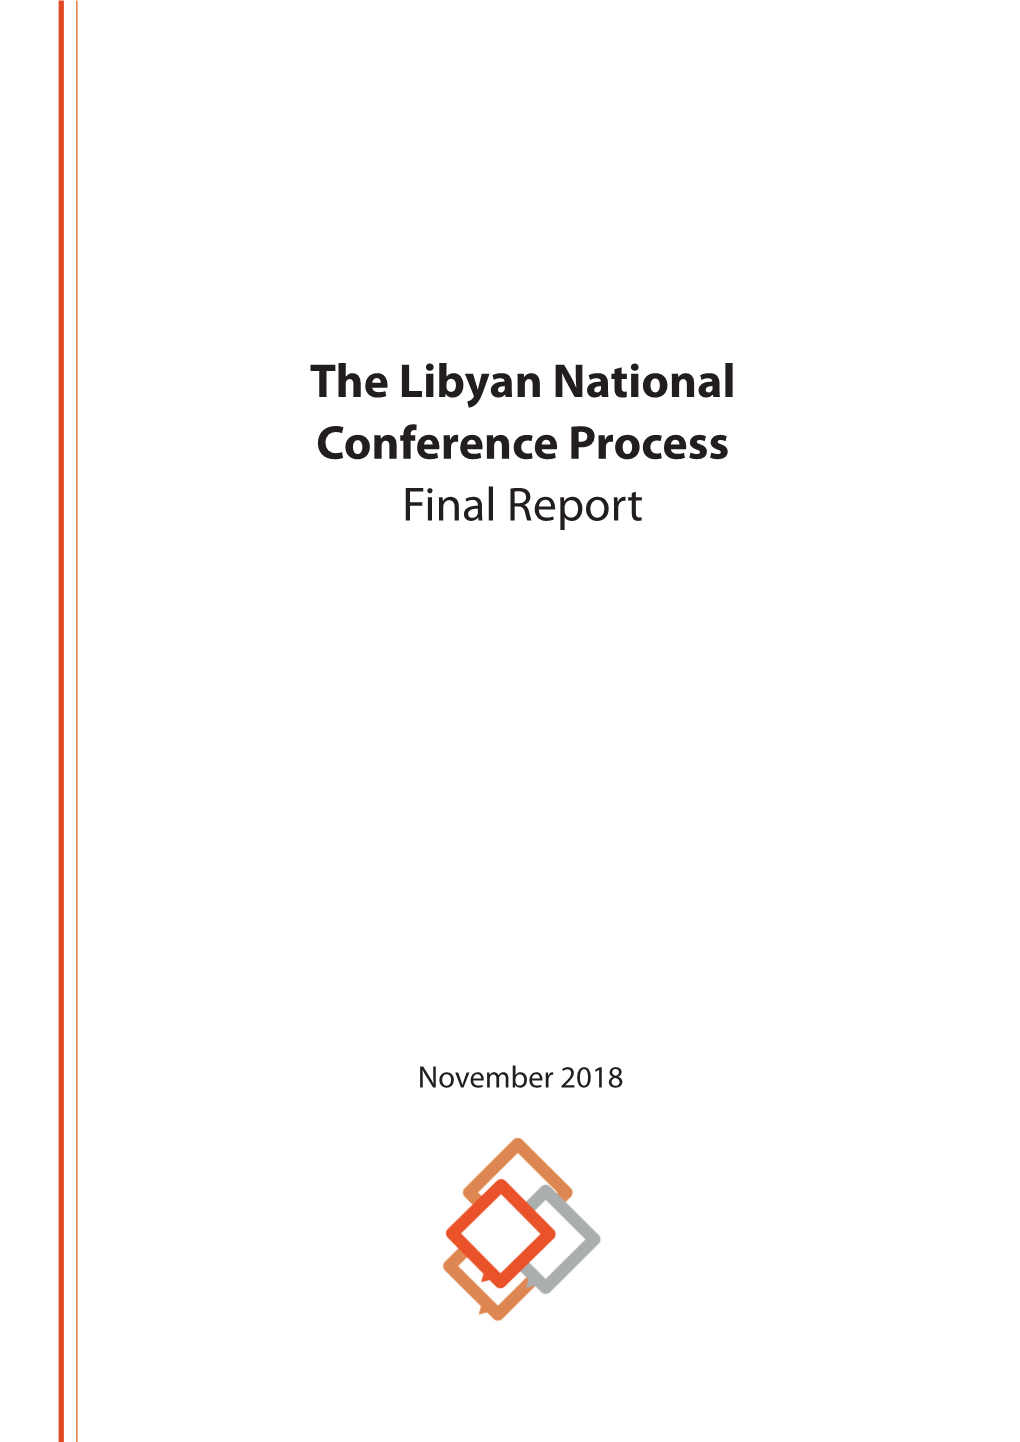 The Libyan National Conference Process Final Report